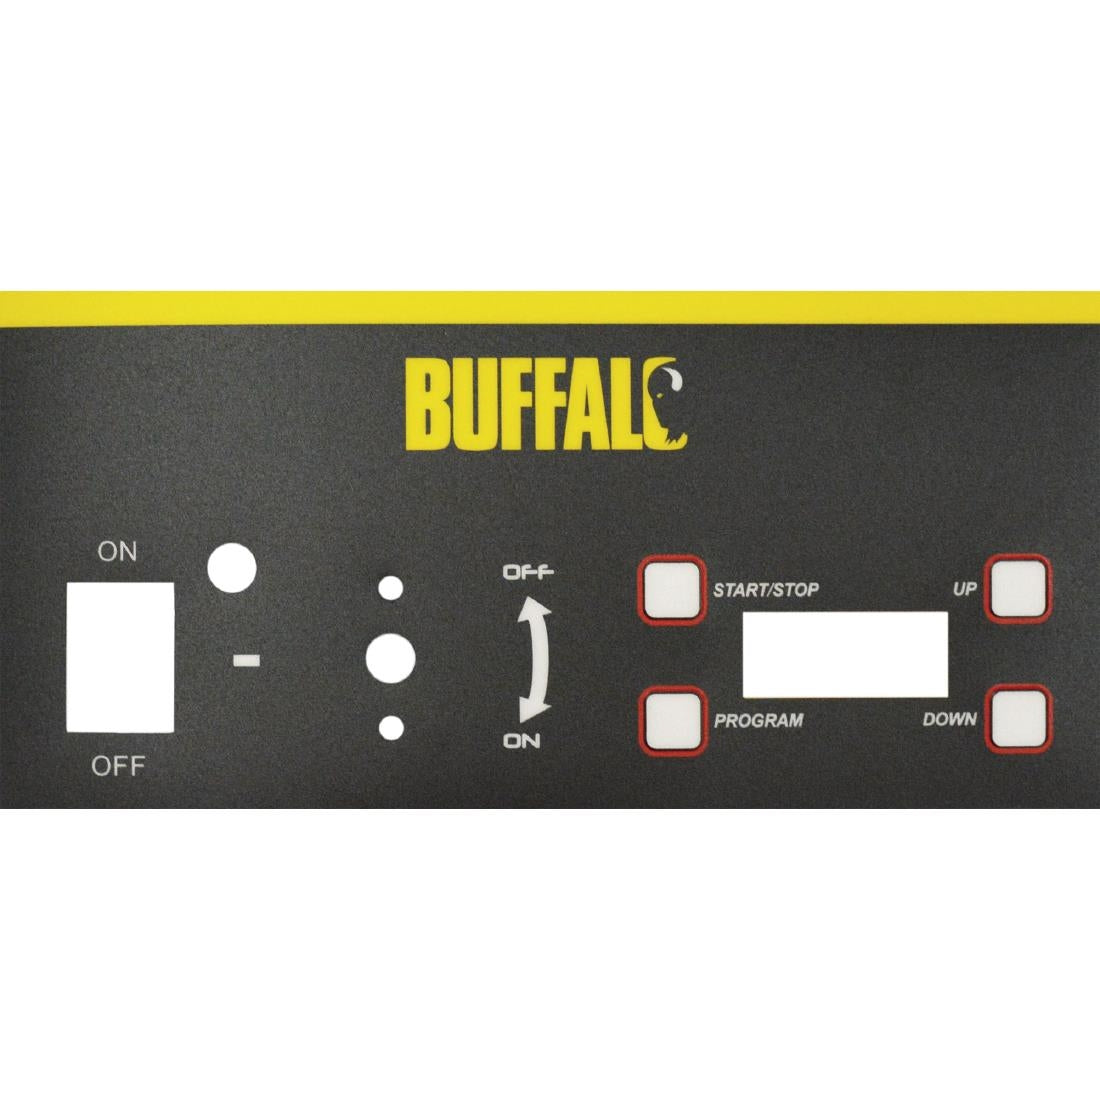 Buffalo Decal Sticker AF490 JD Catering Equipment Solutions Ltd